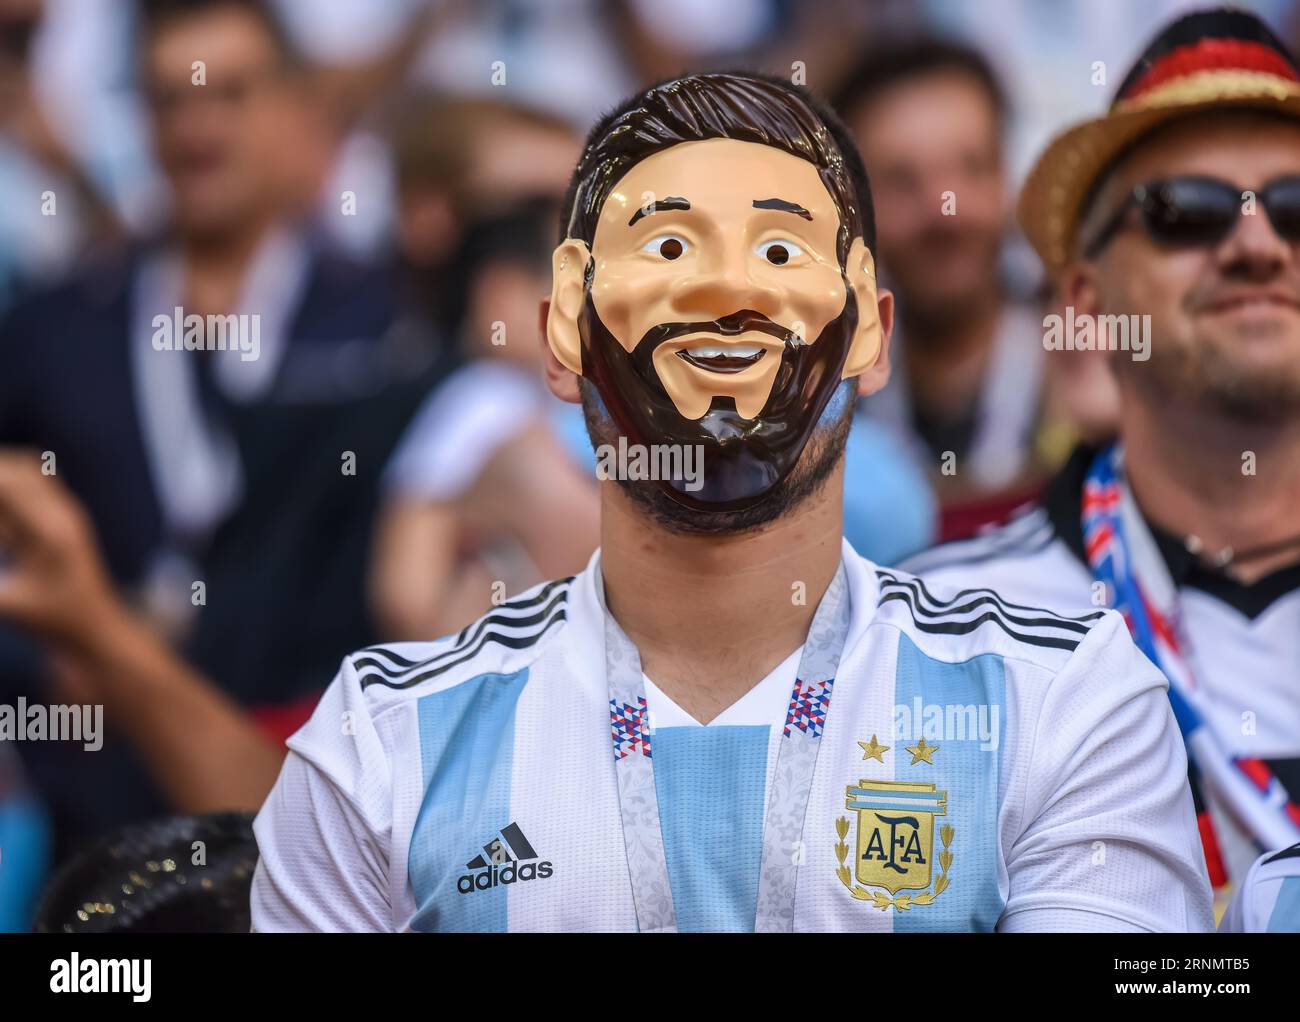 Moscow, Russia - June 16, 2018. Fan from Argentina wearing Lionel Messi mask during FIFA World Cup 2018 match Argentina vs Iceland (1-1). Stock Photo